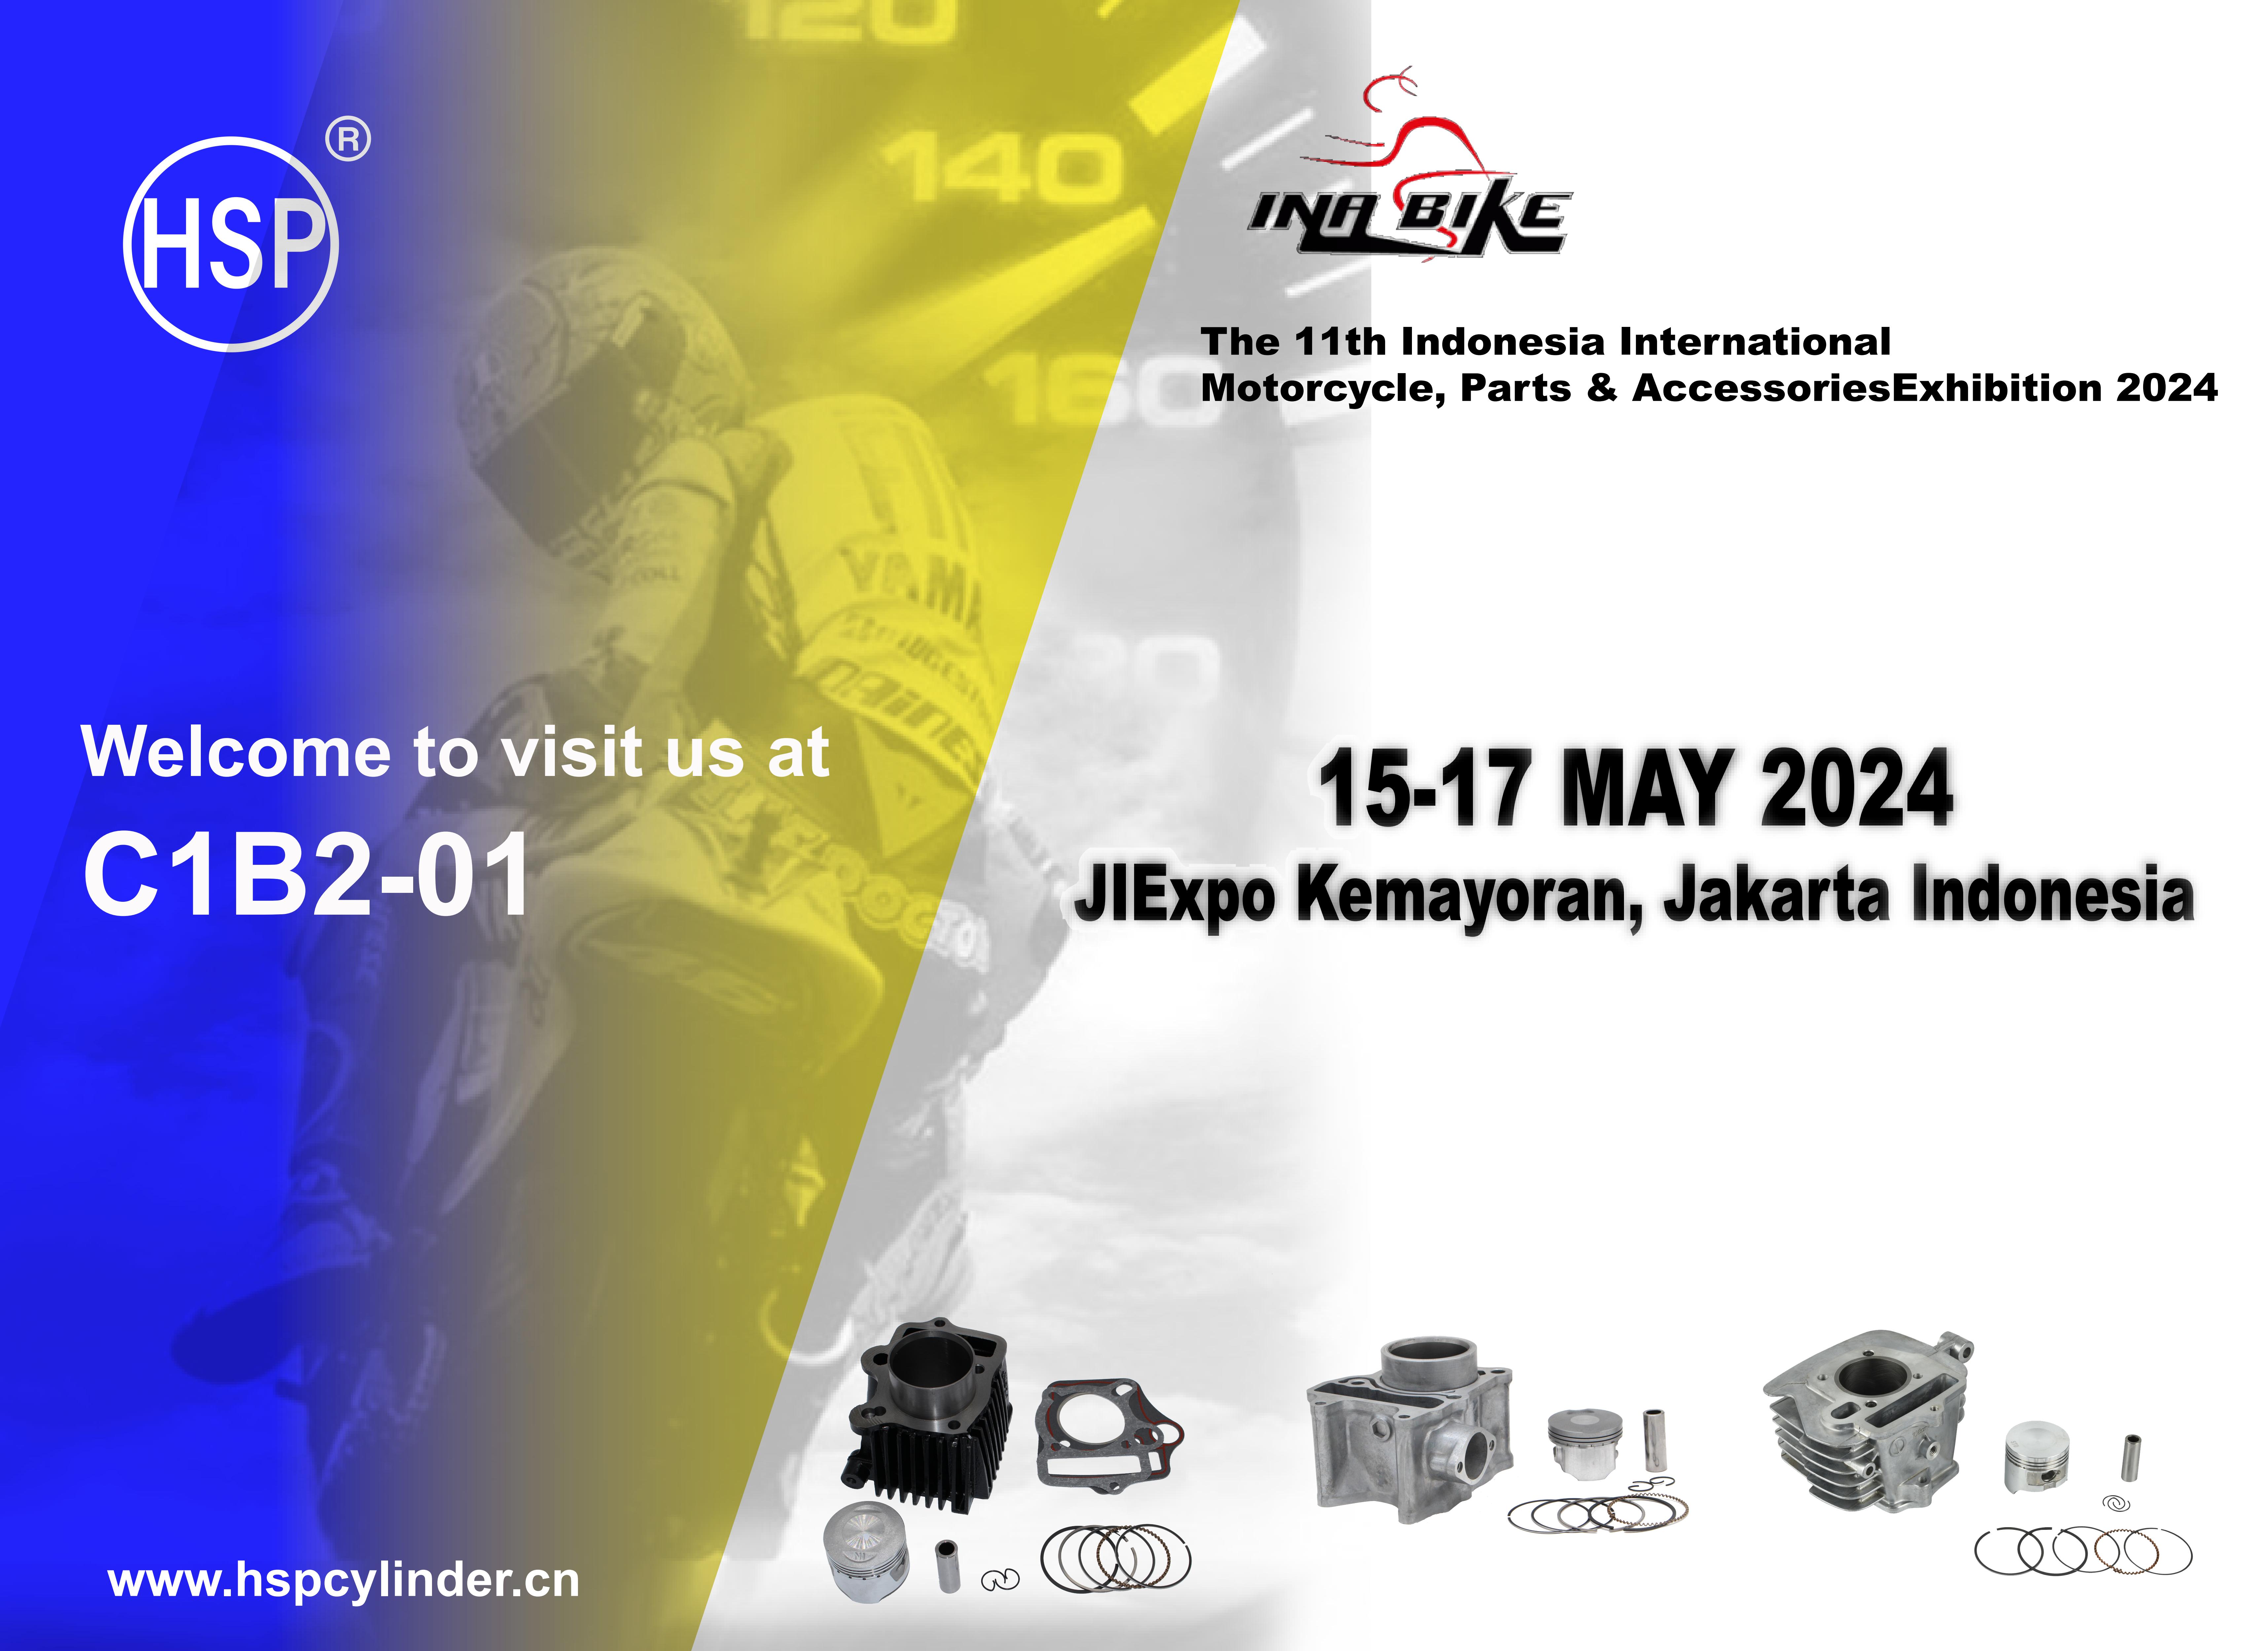 The 11th Indonesia International Motorcycle Parts & Accessories Exhibition 2024